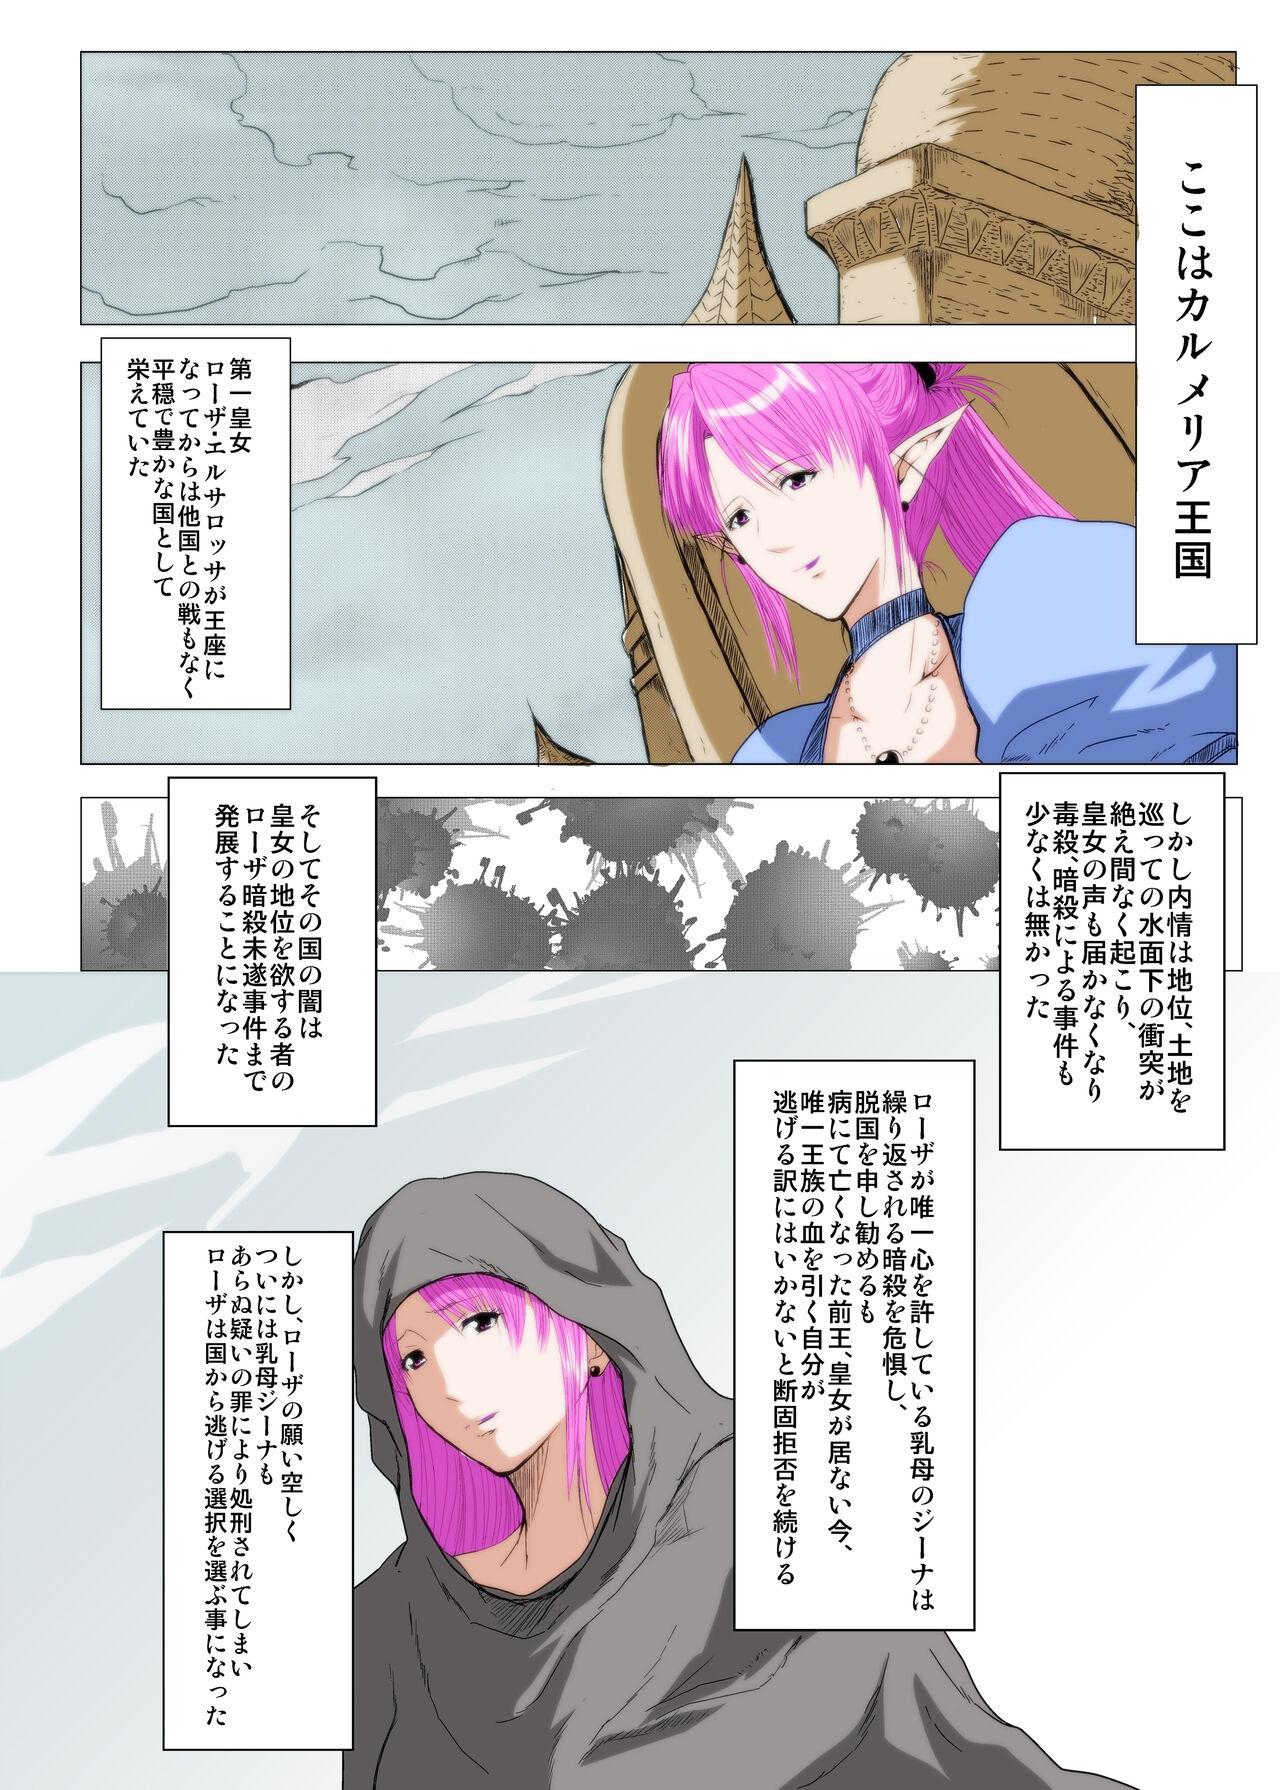 Bisex 僕の∞みんなの彼女 Longhair - Page 2